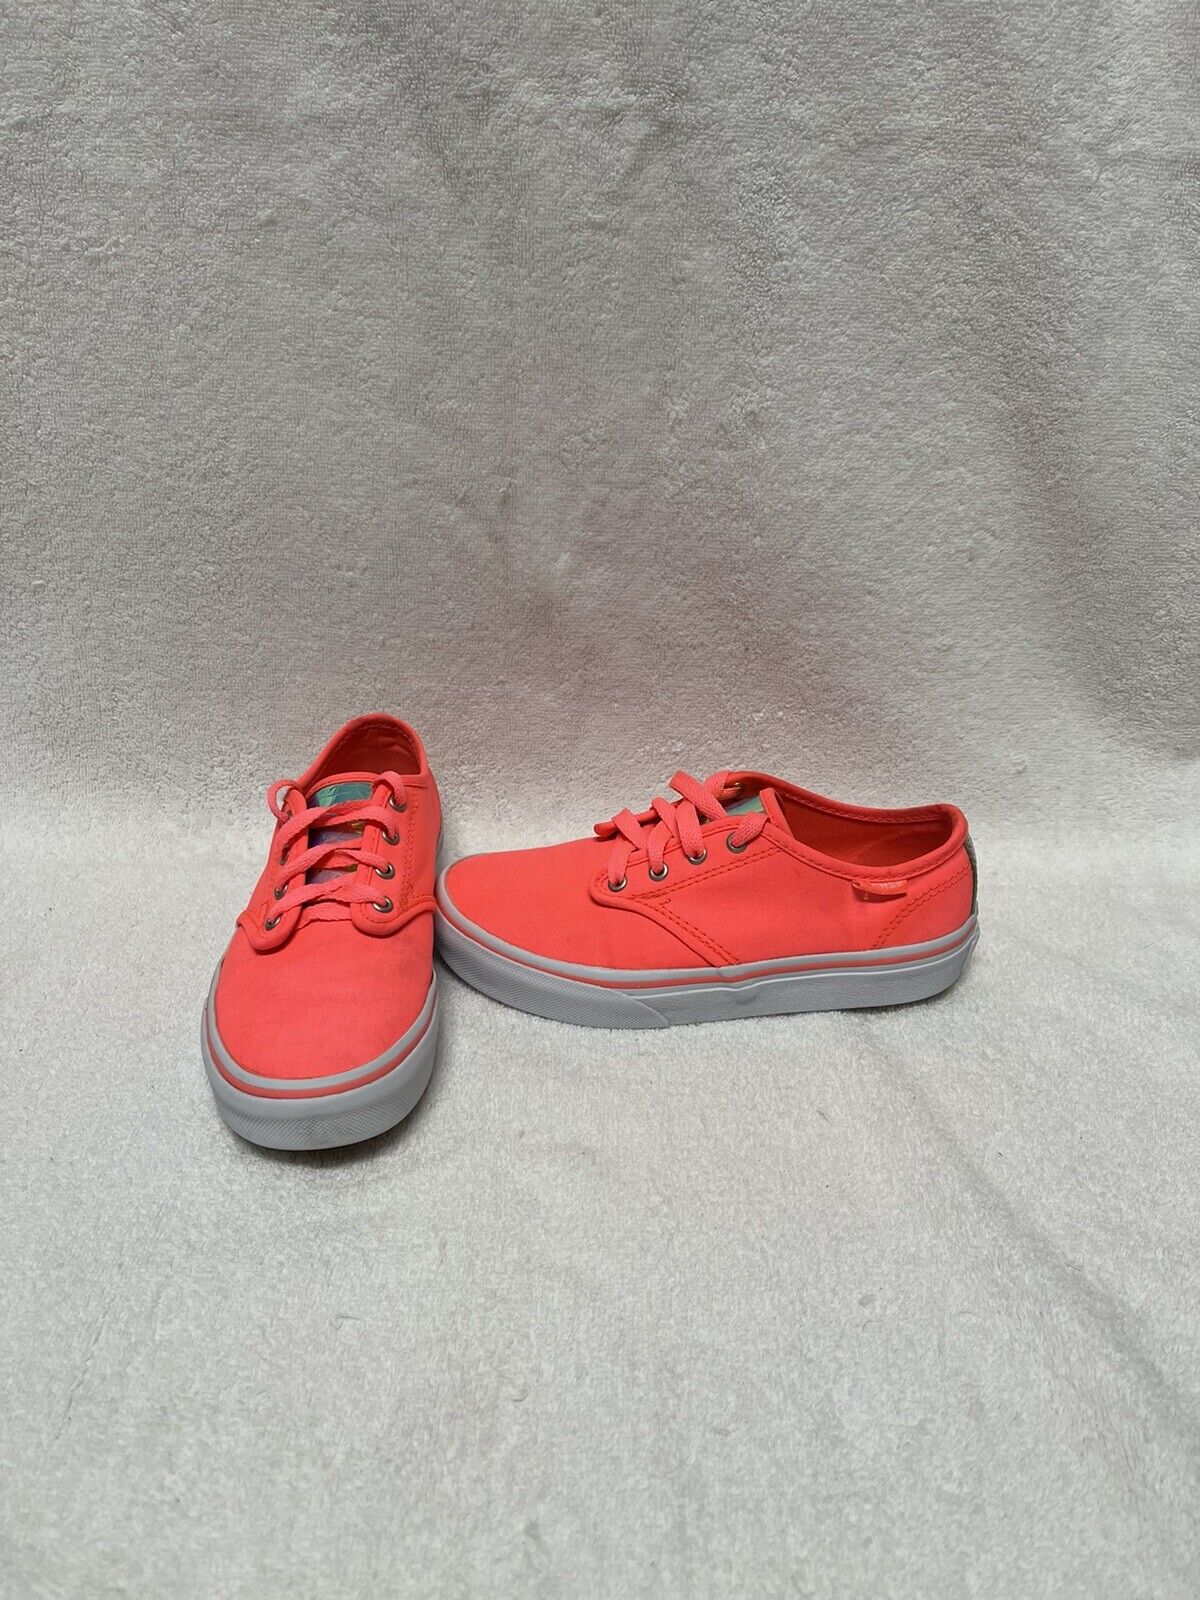 Vans Off The Wall Girls Neon Pink Shoes~size 1 Y